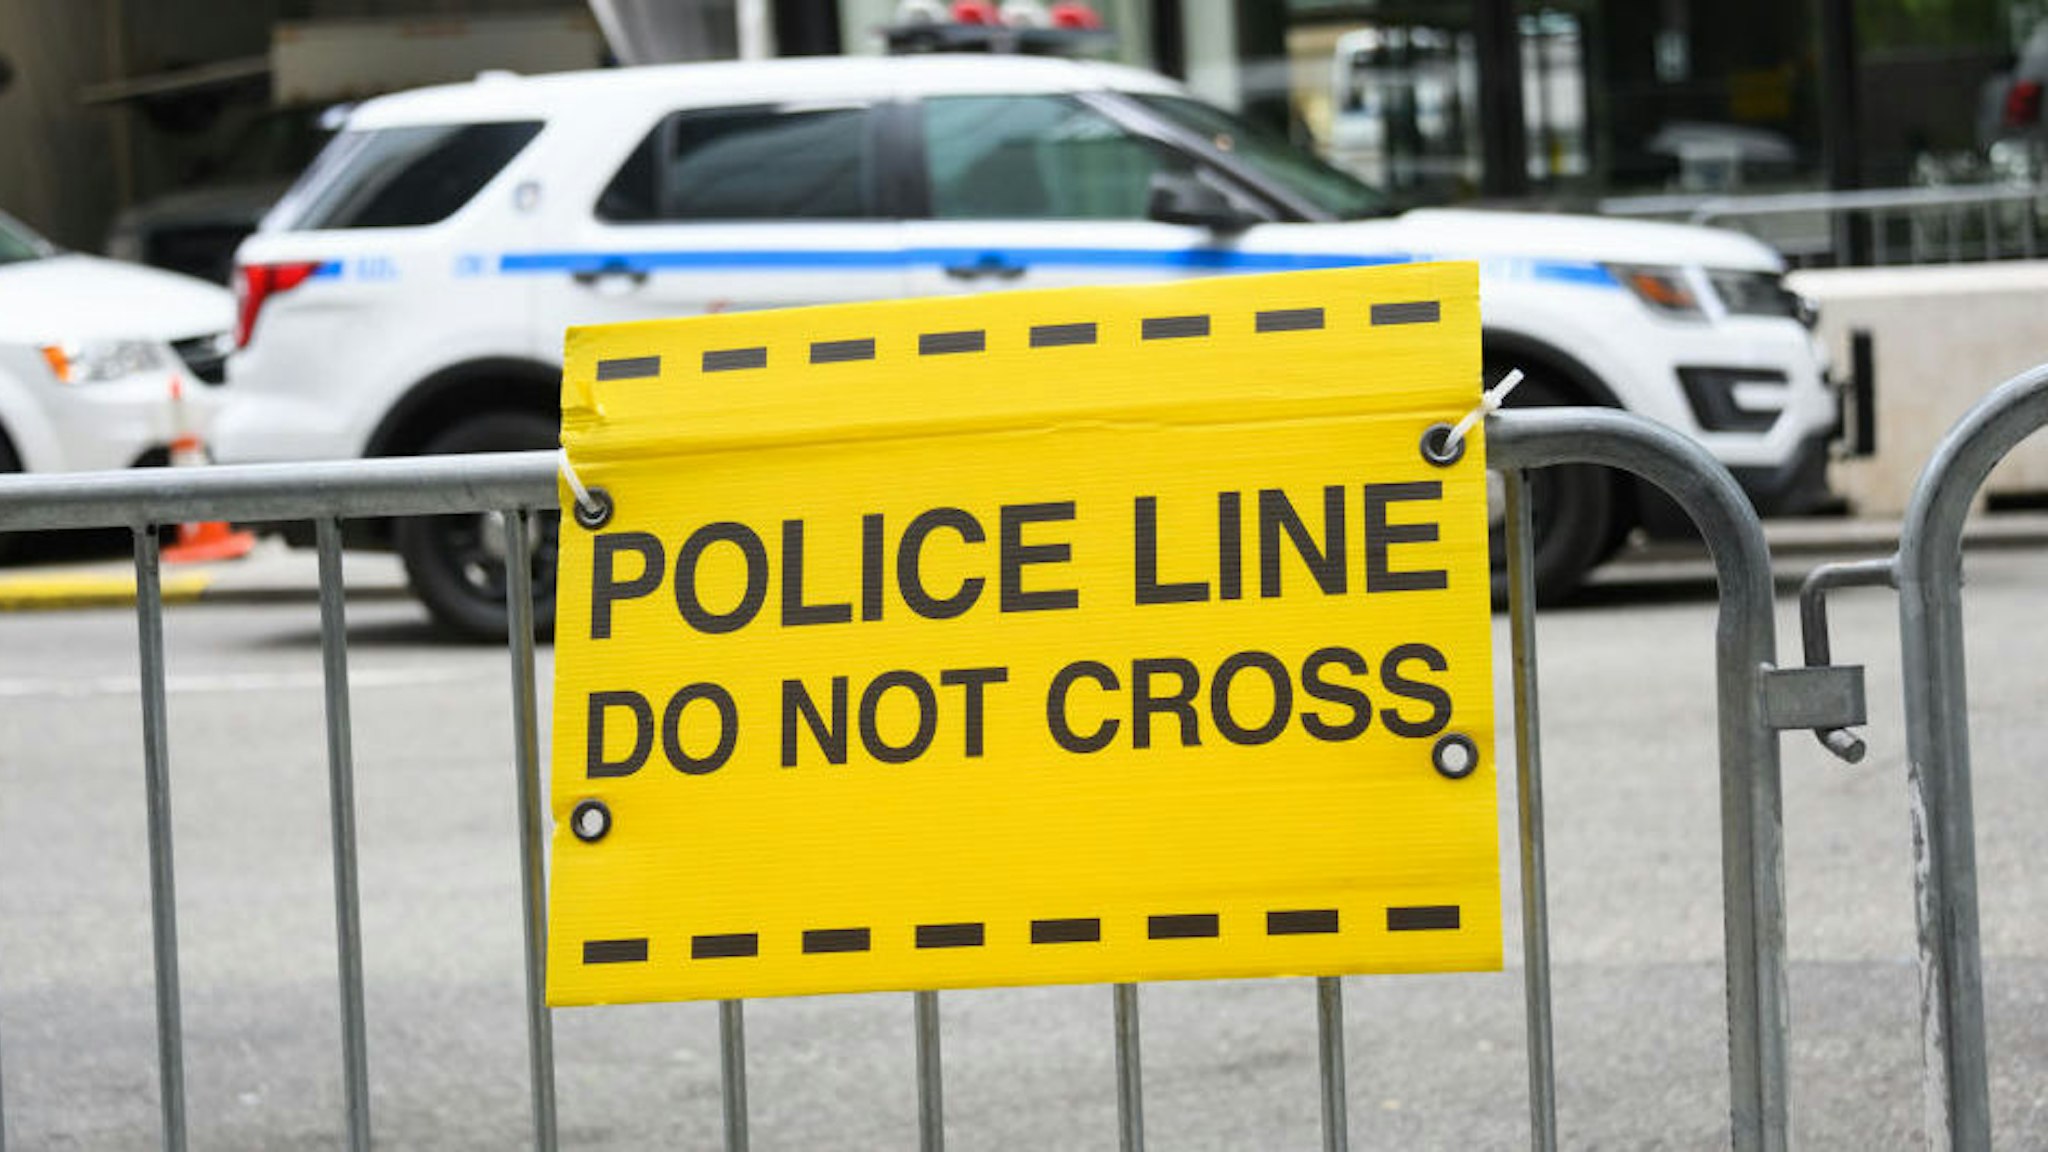 A police 'Do Not Cross' sign placed outside Trump Tower on Fifth Avenue during the coronavirus pandemic on May 2, 2020 in New York City. COVID-19 has spread to most countries around the world, claiming over 244,000 lives with over 3.4 million infections reported. (Photo by Noam Galai/Getty Images)